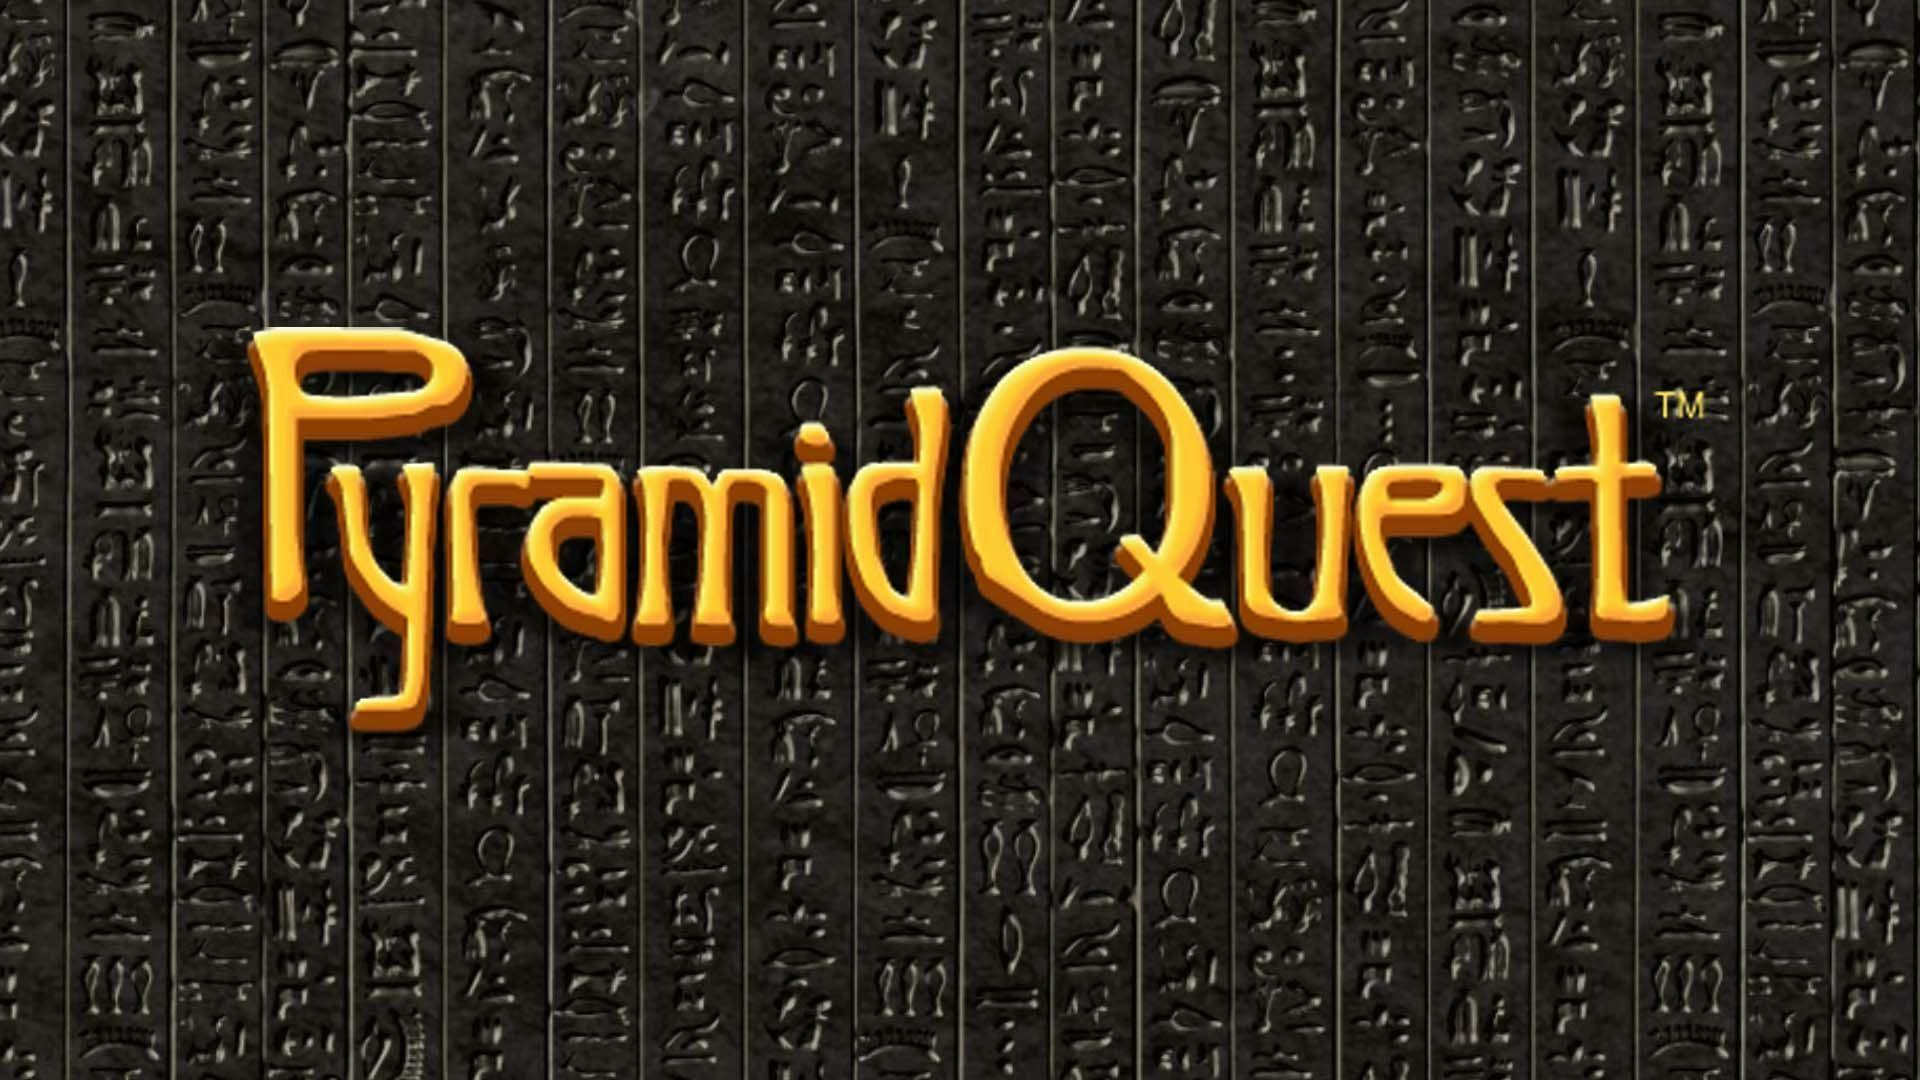 Pyramid Quest Slot Machine Online Free Game Play